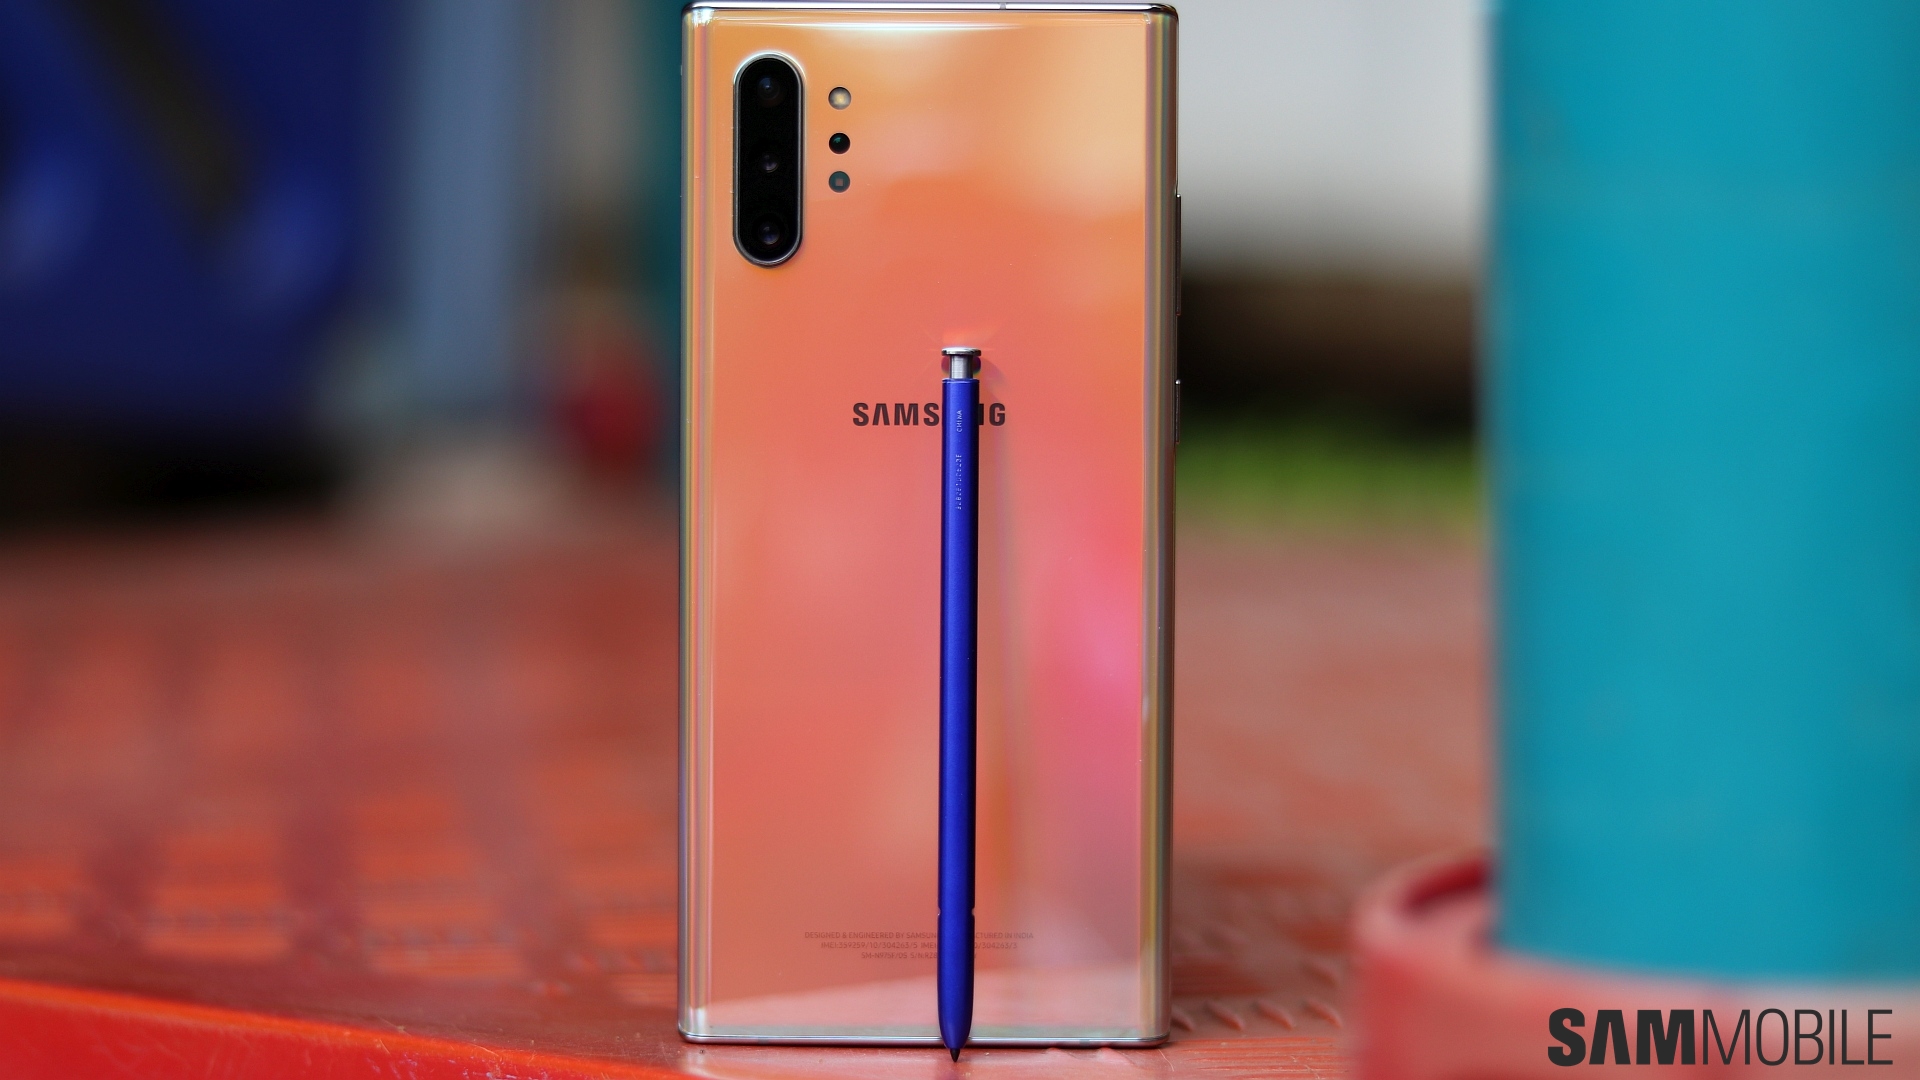 Galaxy Note 10+ vs. Galaxy Note 10: Which should you buy